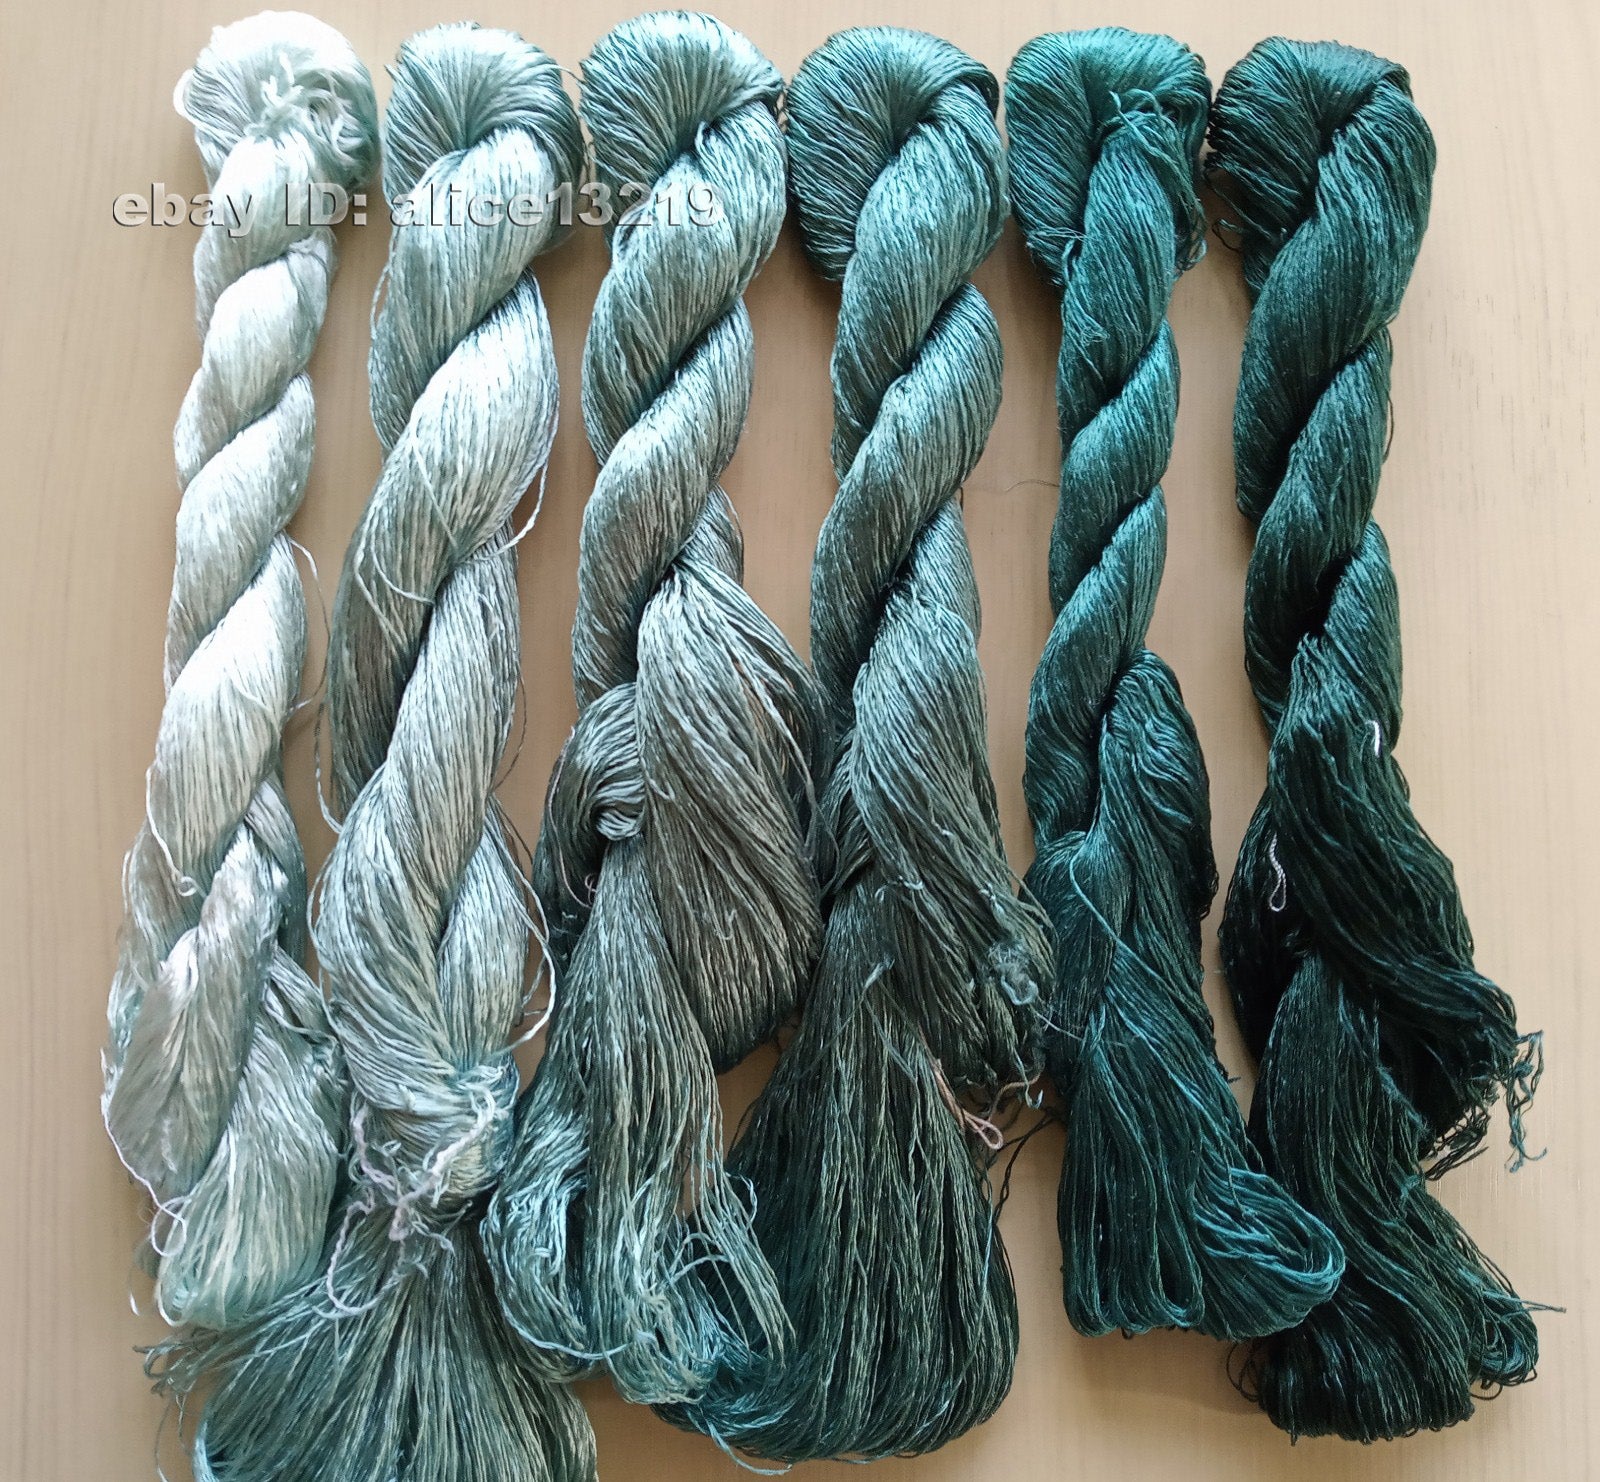 6bundles 100%real mulberry silk,hand-dyed embroidery silk floss/thread N52